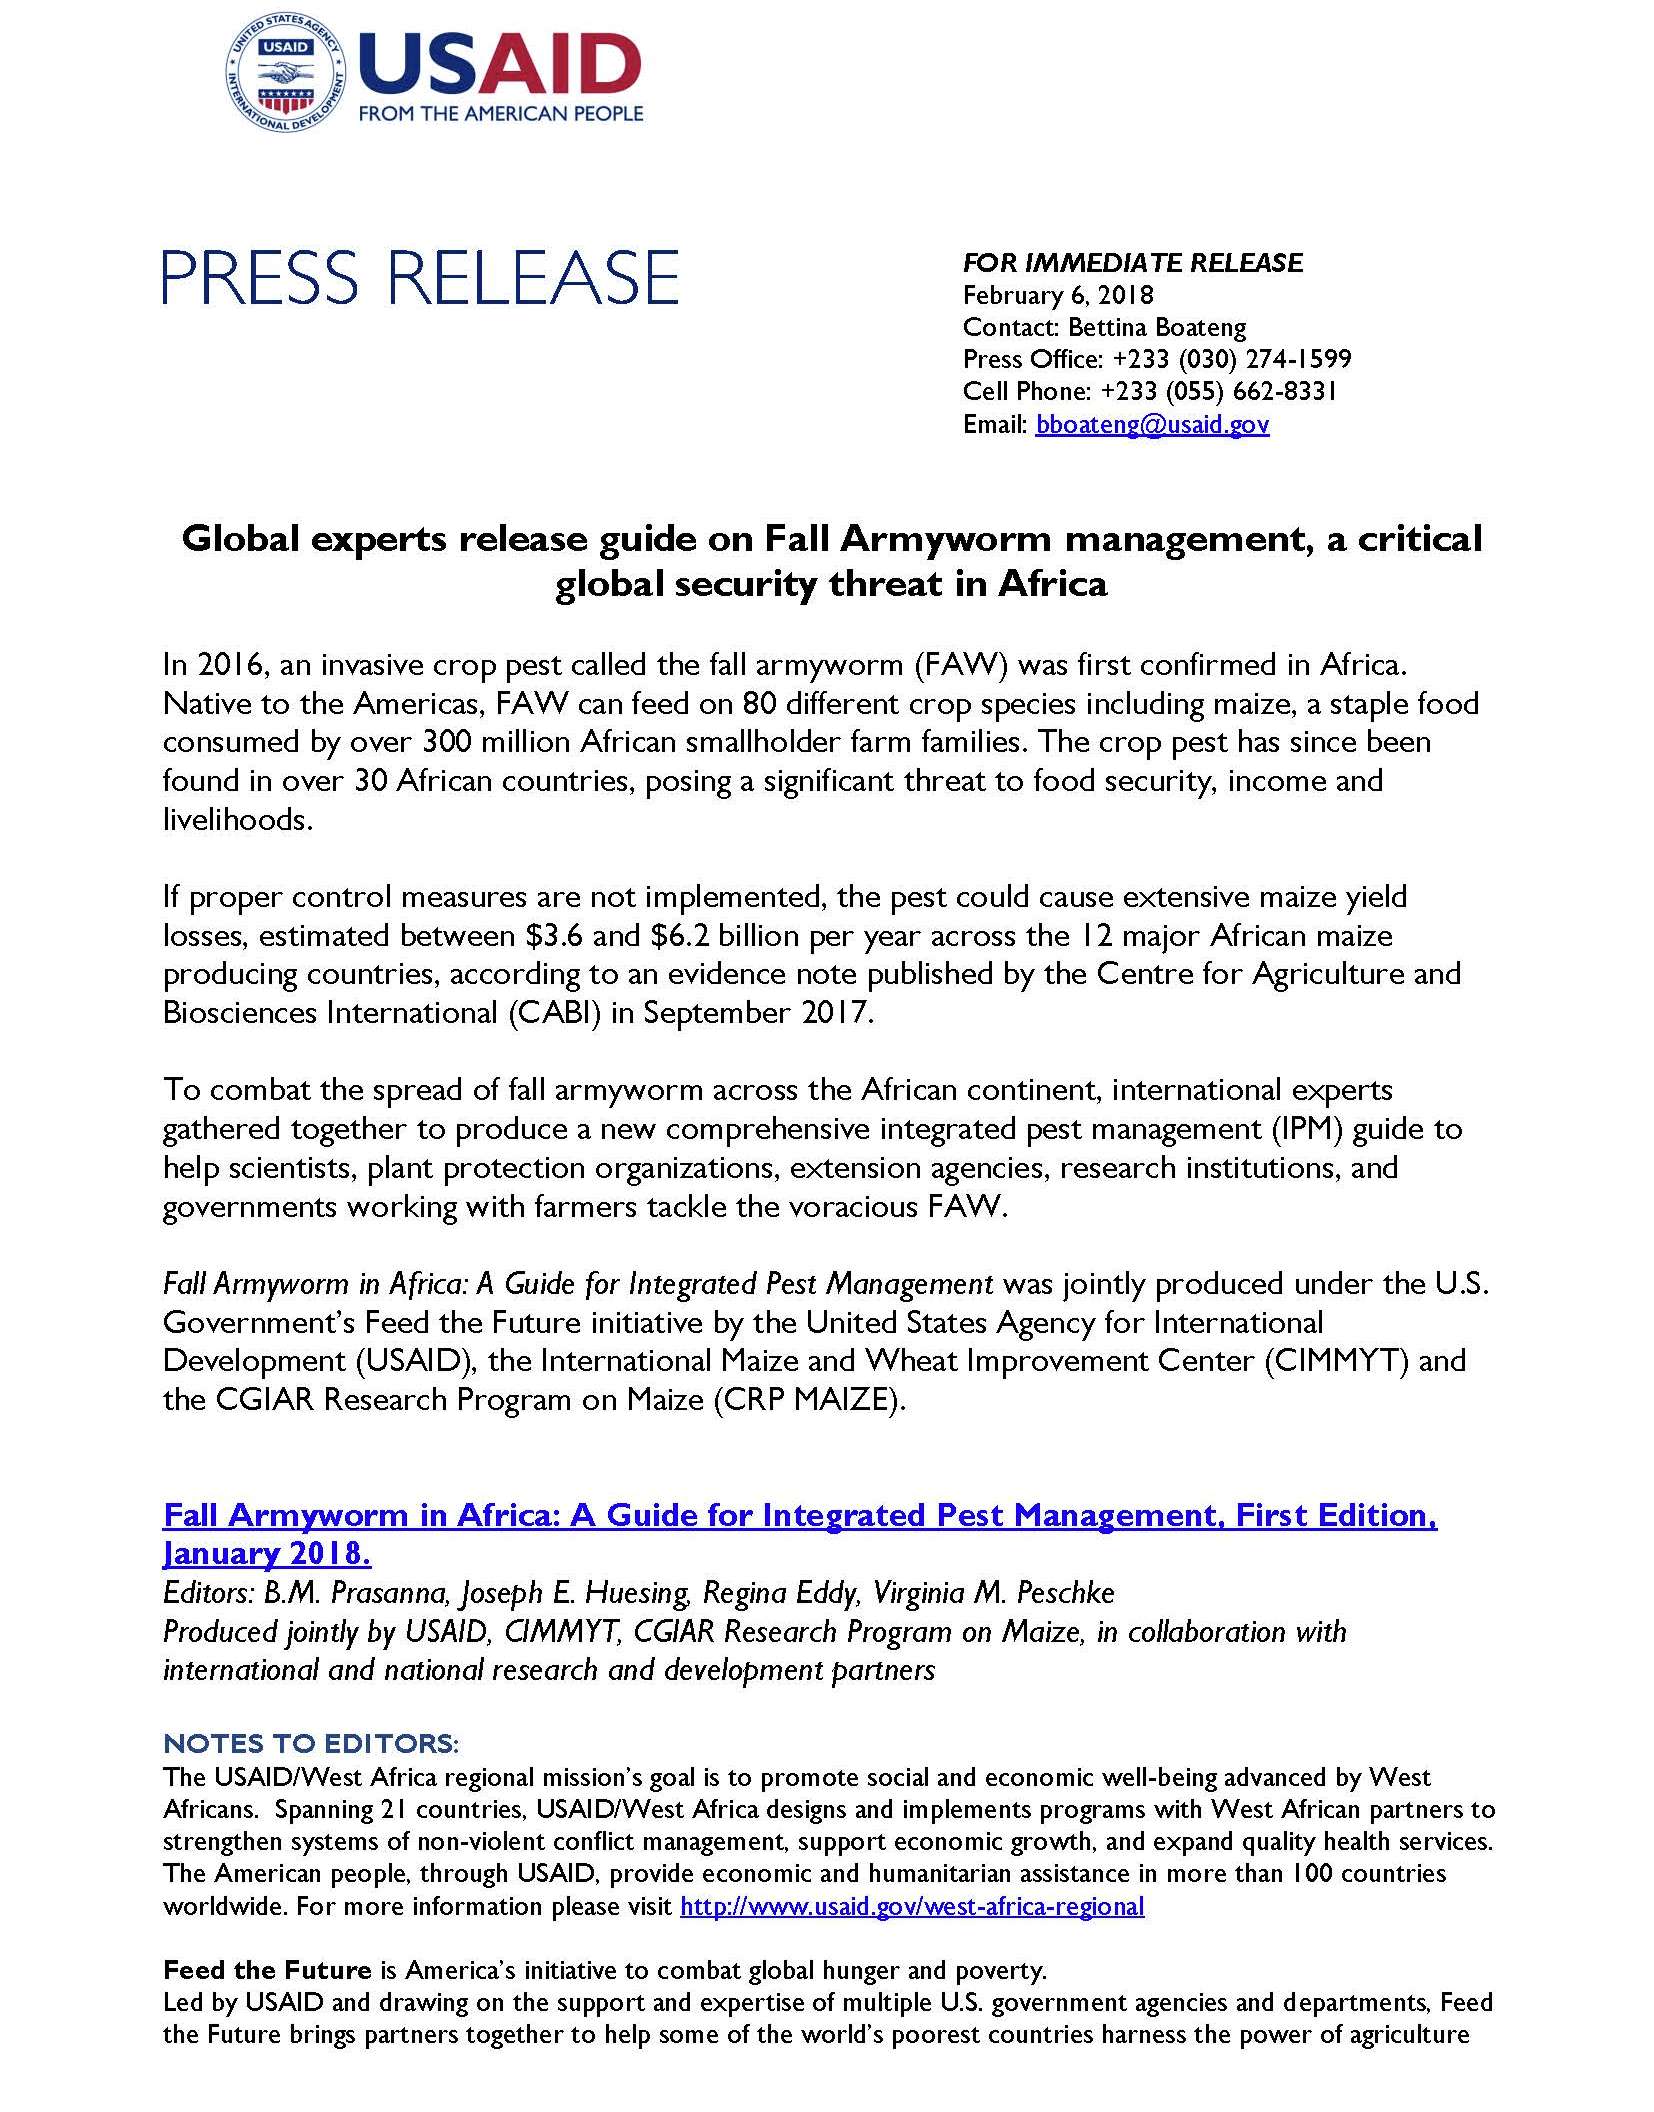 Fall Armyworm Press Release